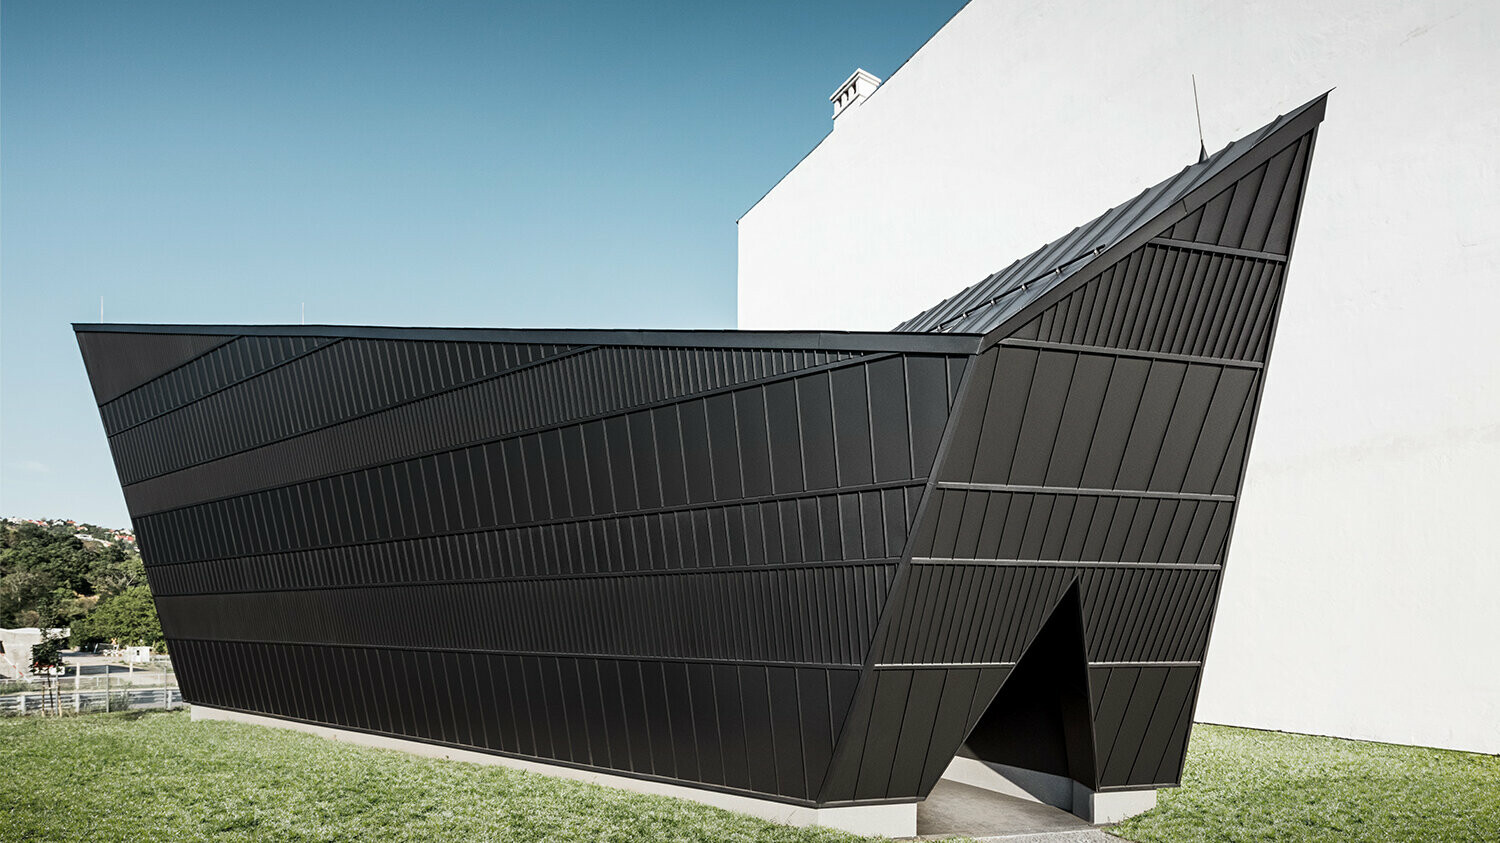 The new cinema pavilion, clad with black aluminium, of the museum in Skanzen from a lateral perspective, designed by the architect István Bársony.